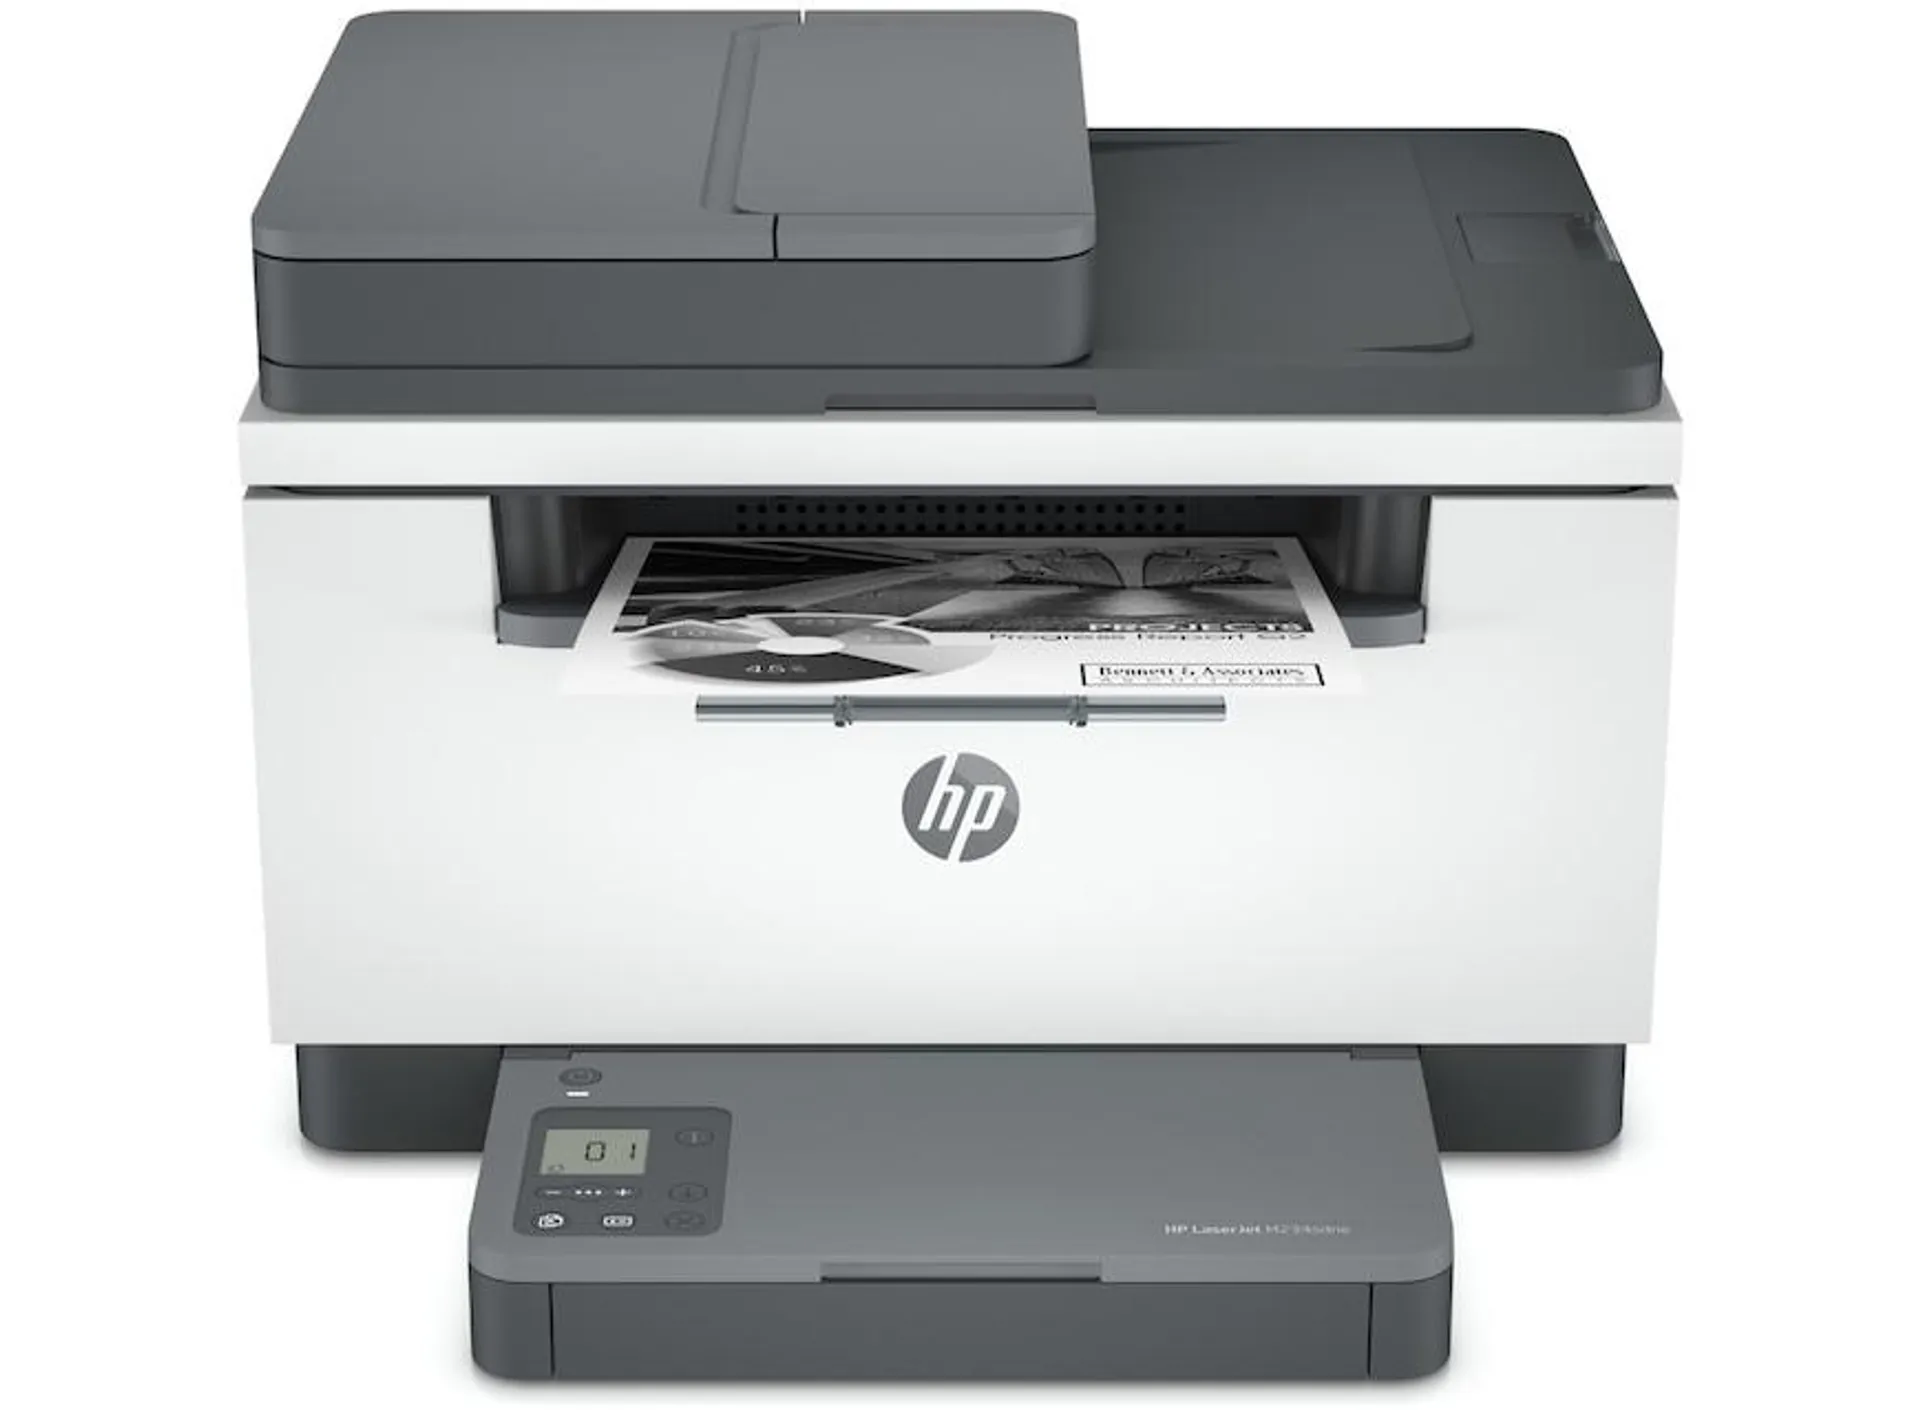 HP LaserJet M234sdne Multifunction HP+ Network Black & White Printer with 6 Months Instant Ink & 1 Year Extra Warranty